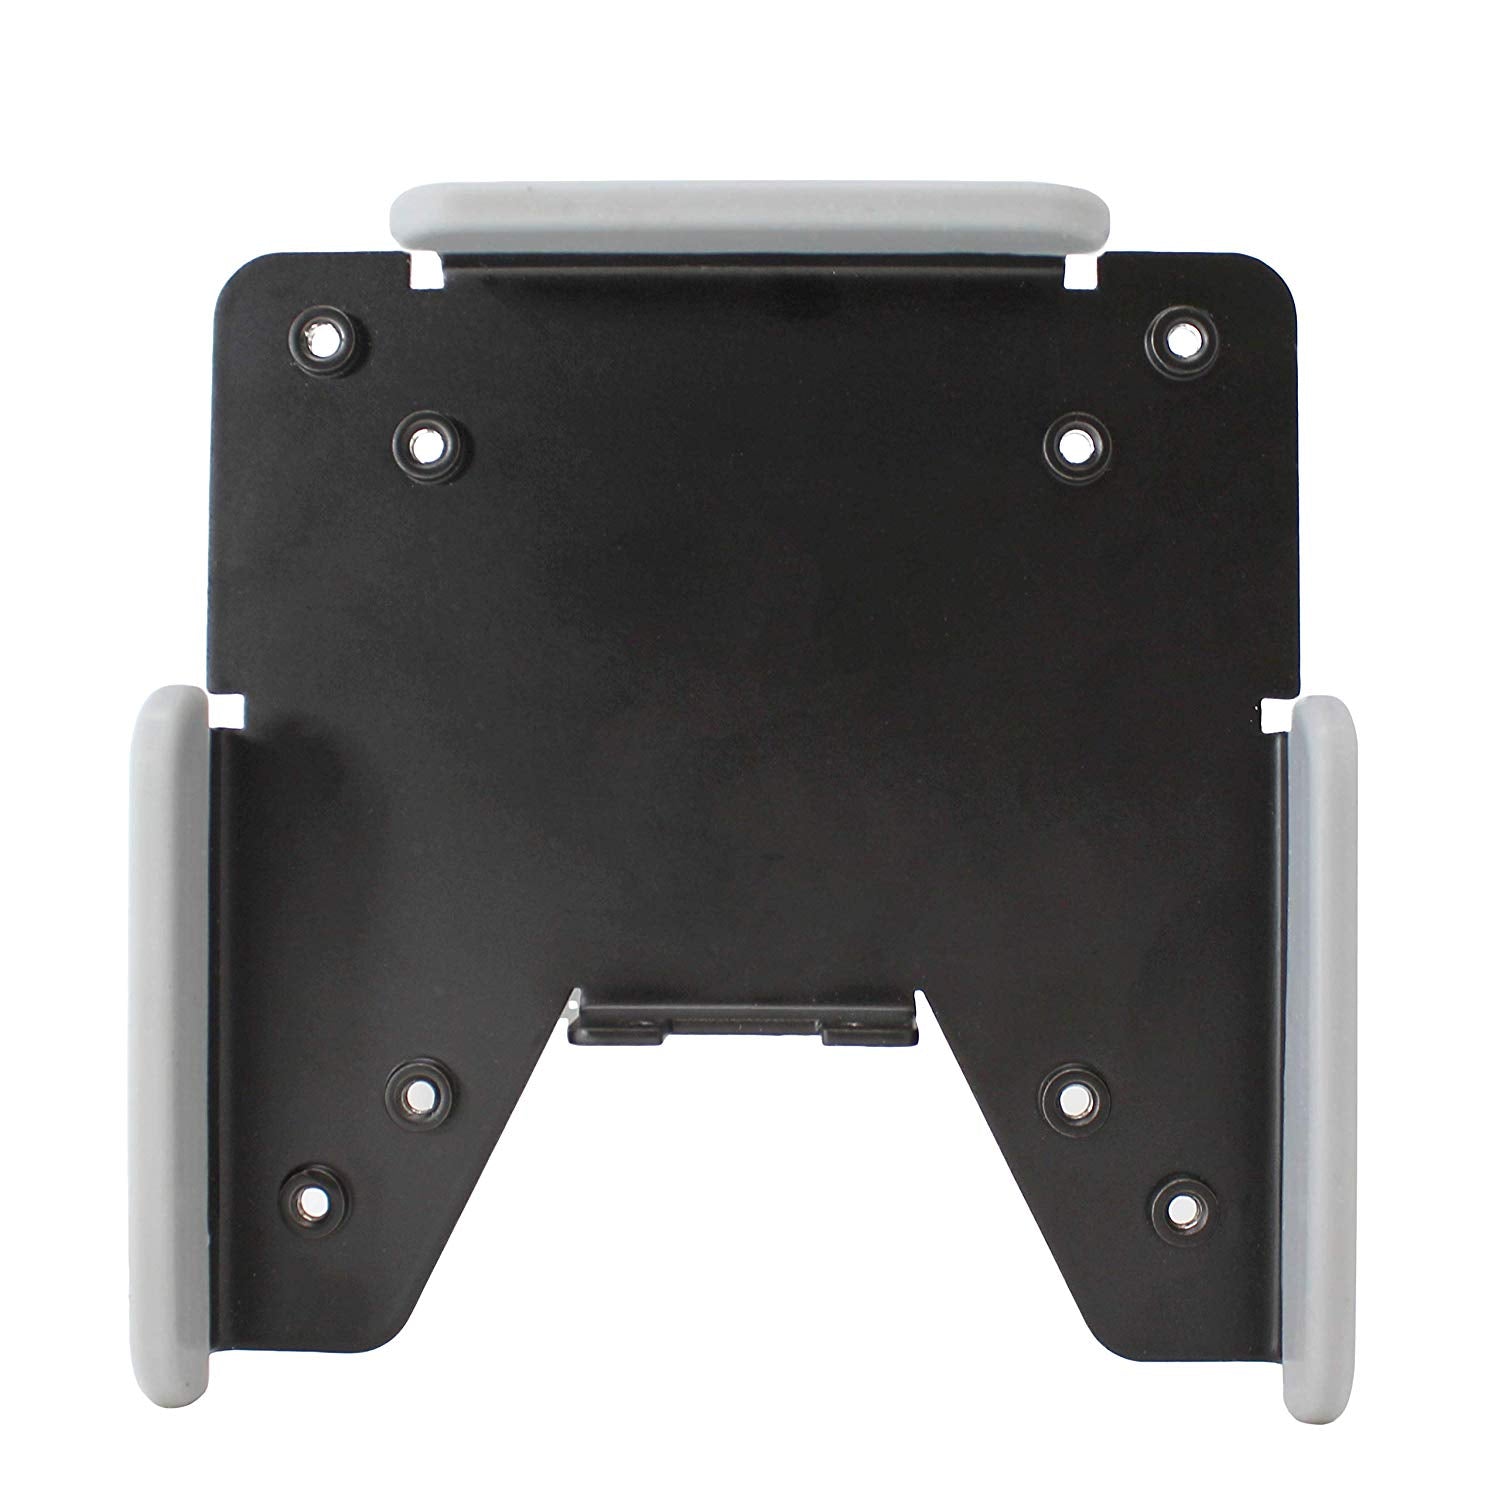 VESA Mount Adapter for Dell Ultrathin S2419HM and S2719DM Monitors